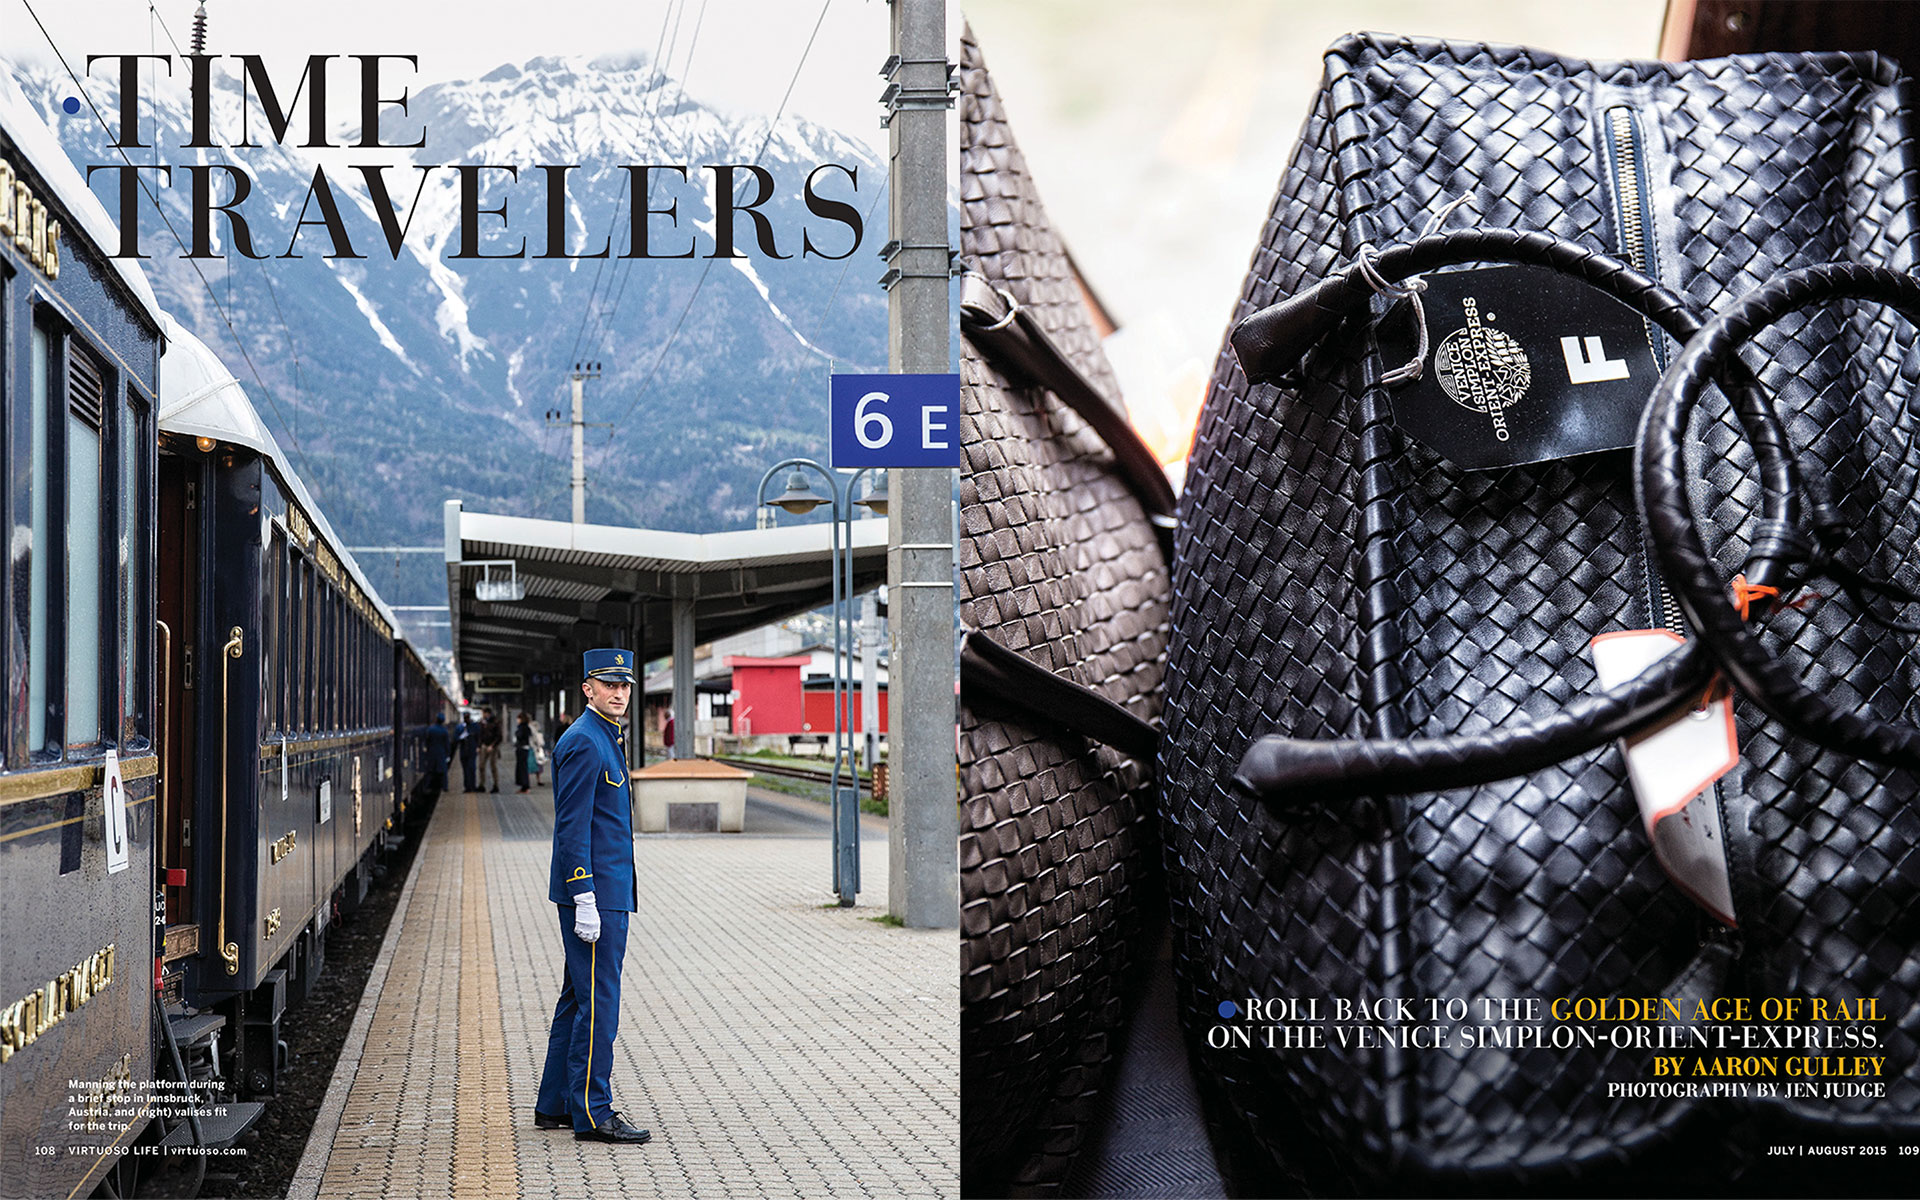 <p style="text-align: center;"><b><font color="2a2871">Time Travelers, Virtuoso Life, July 2015</font></b>
</p>
Roll back to the Golden Age of rail on the Venice-Simplon-Orient-Express.
<p style="text-align: center;"><a href="/users/AaronGulley18670/VL_Venice_7-15.pdf" onclick="window.open(this.href, '', 'resizable=no,status=no,location=no,toolbar=no,menubar=no,fullscreen=no,scrollbars=no,dependent=no,width=900'); return false;">Read the Story</a></p>
